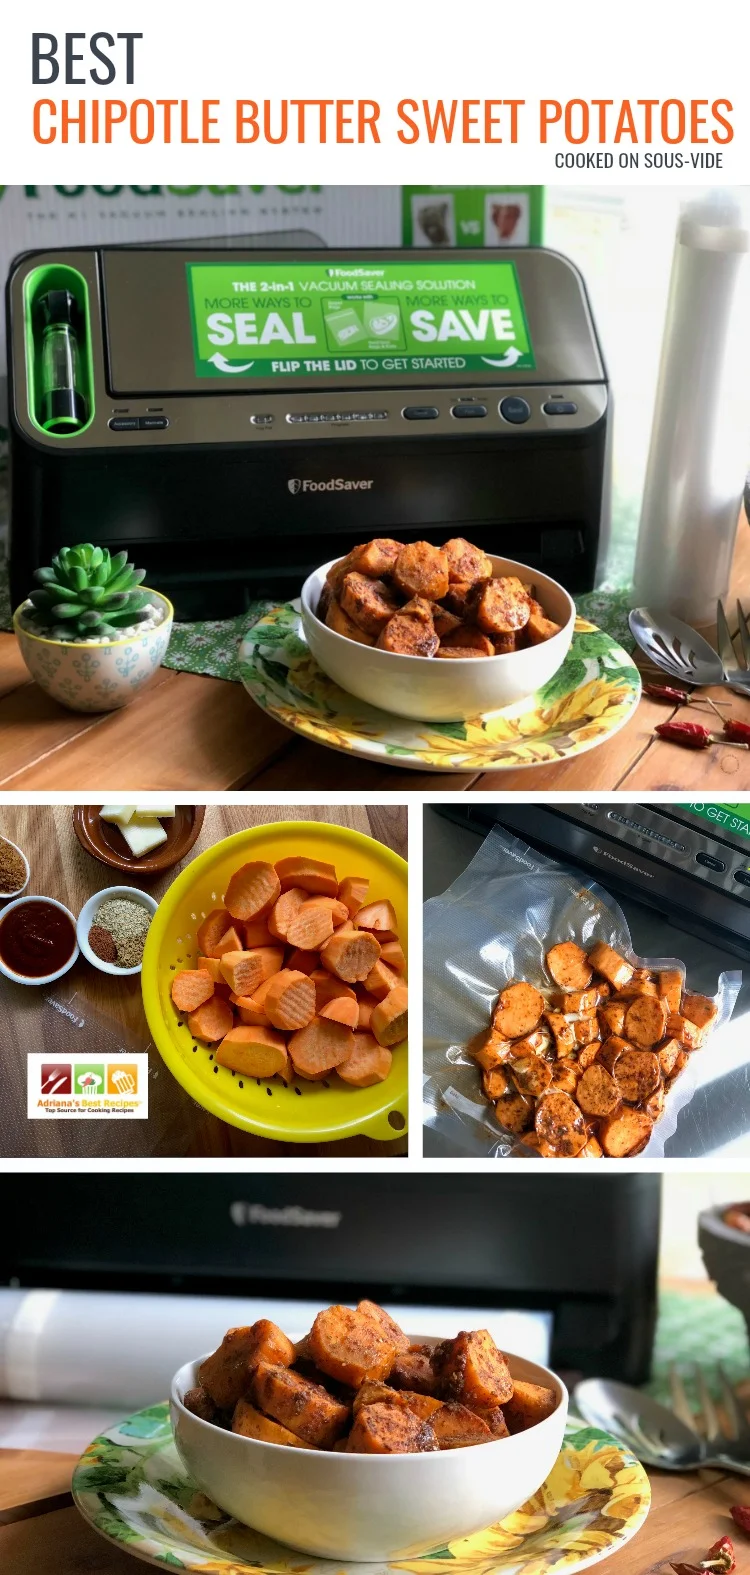 Best Chipotle Butter Sweet Potatoes Cooked on Sous-Vide